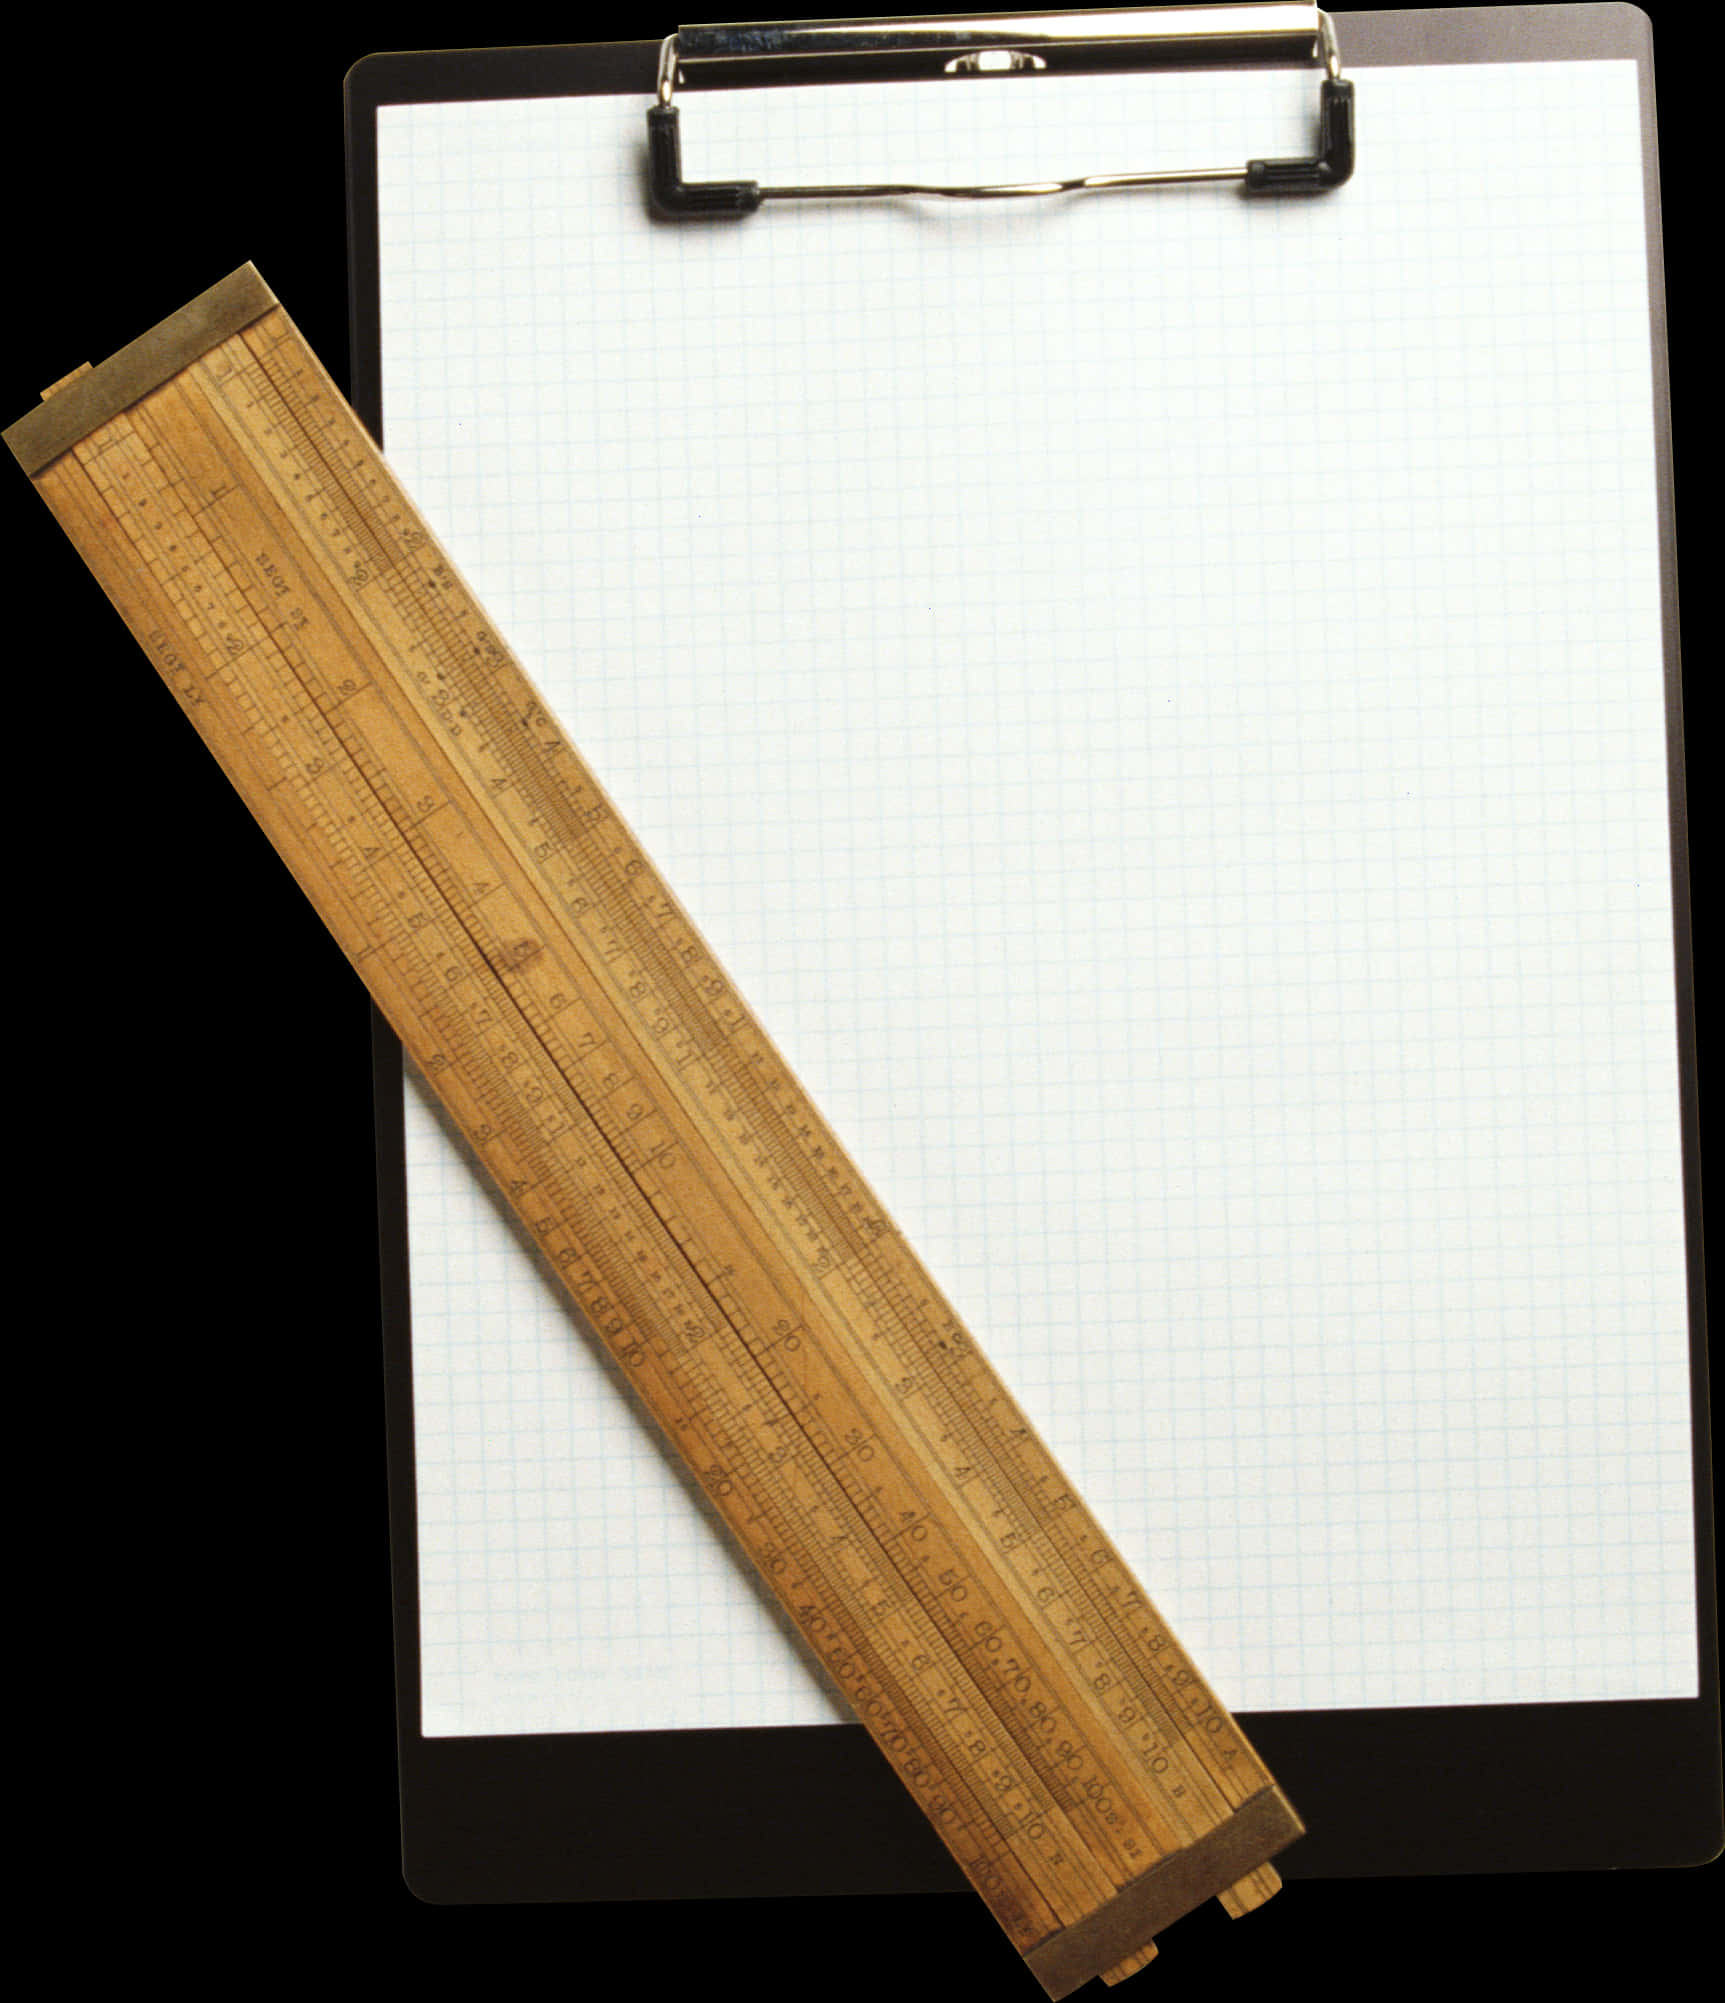 A Clipboard With A Ruler And A Piece Of Paper